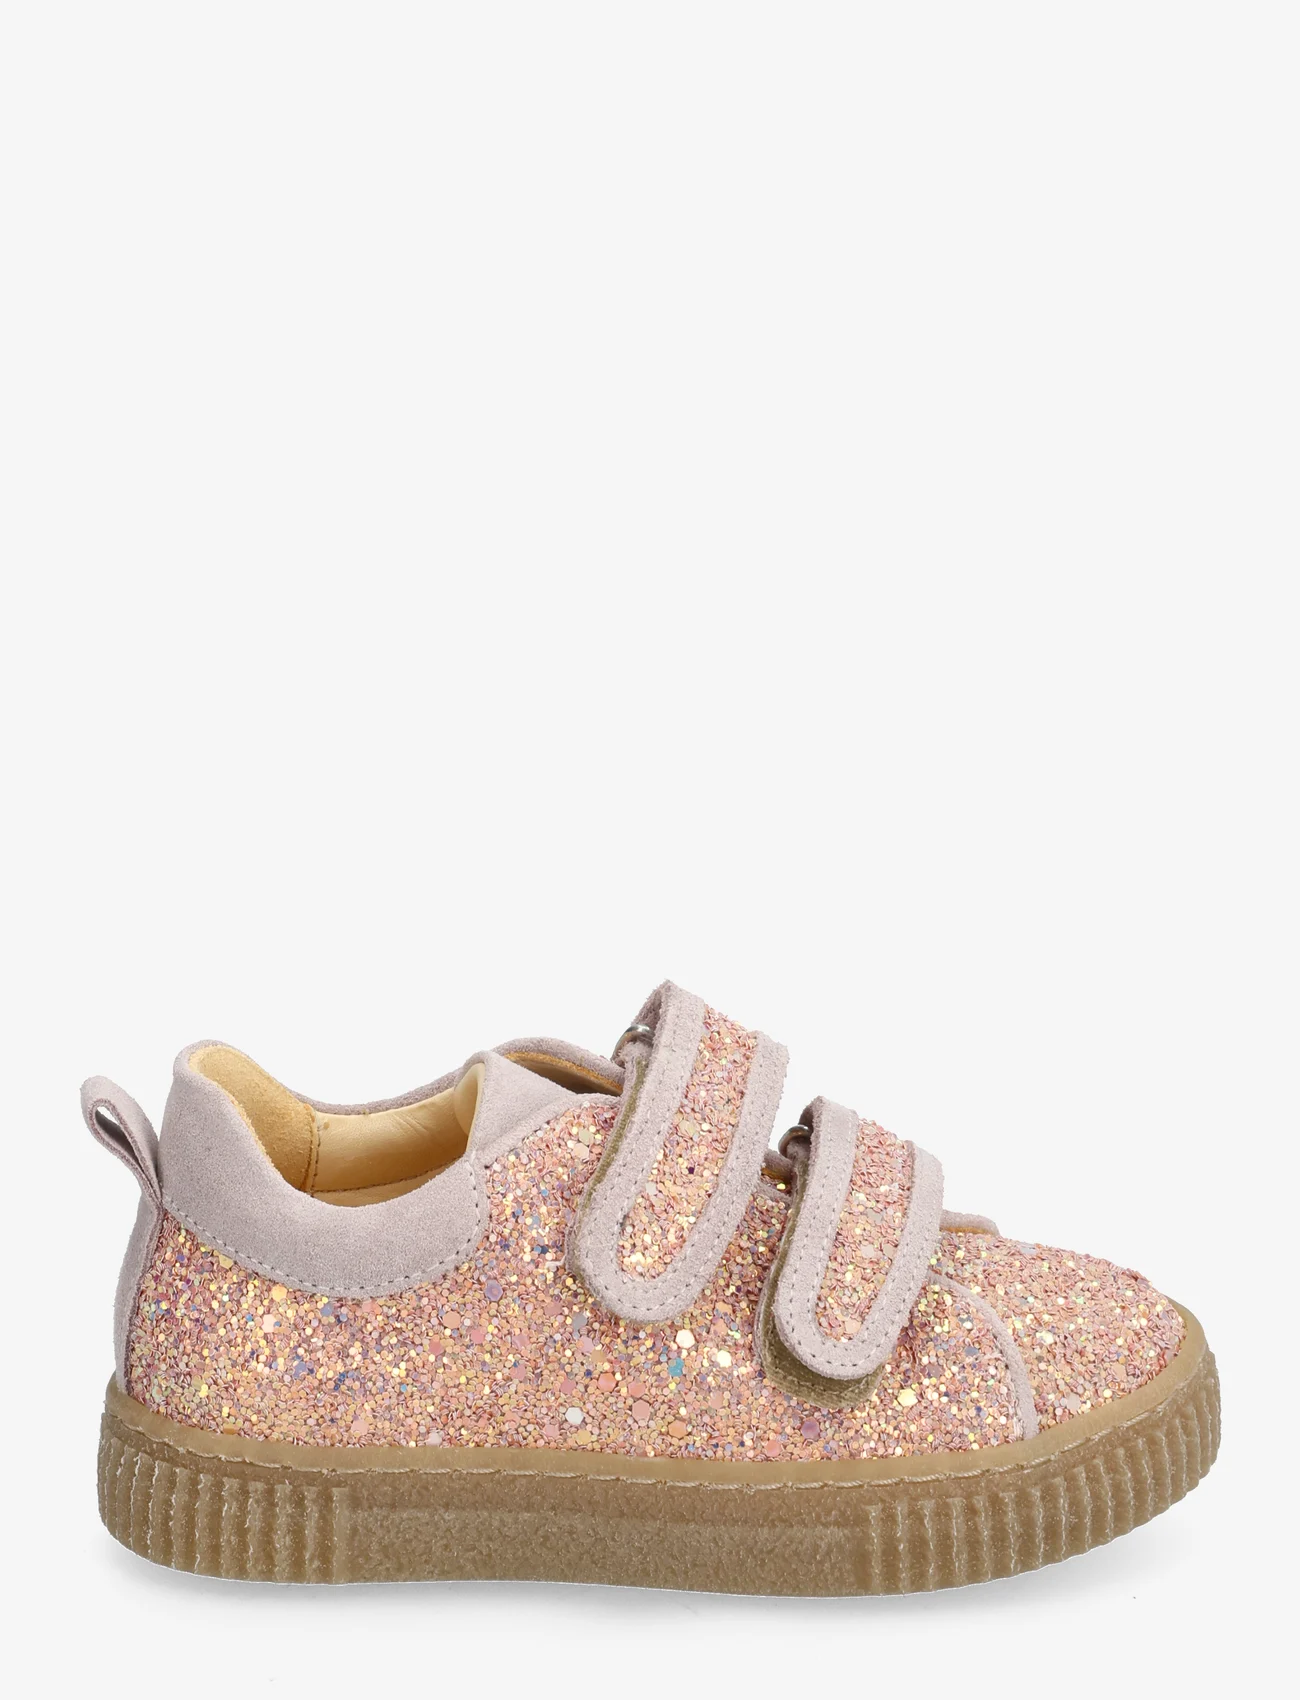 ANGULUS - Shoes - flat - with velcro - sommarfynd - 2750/2731 rose glitter/pale ro - 1